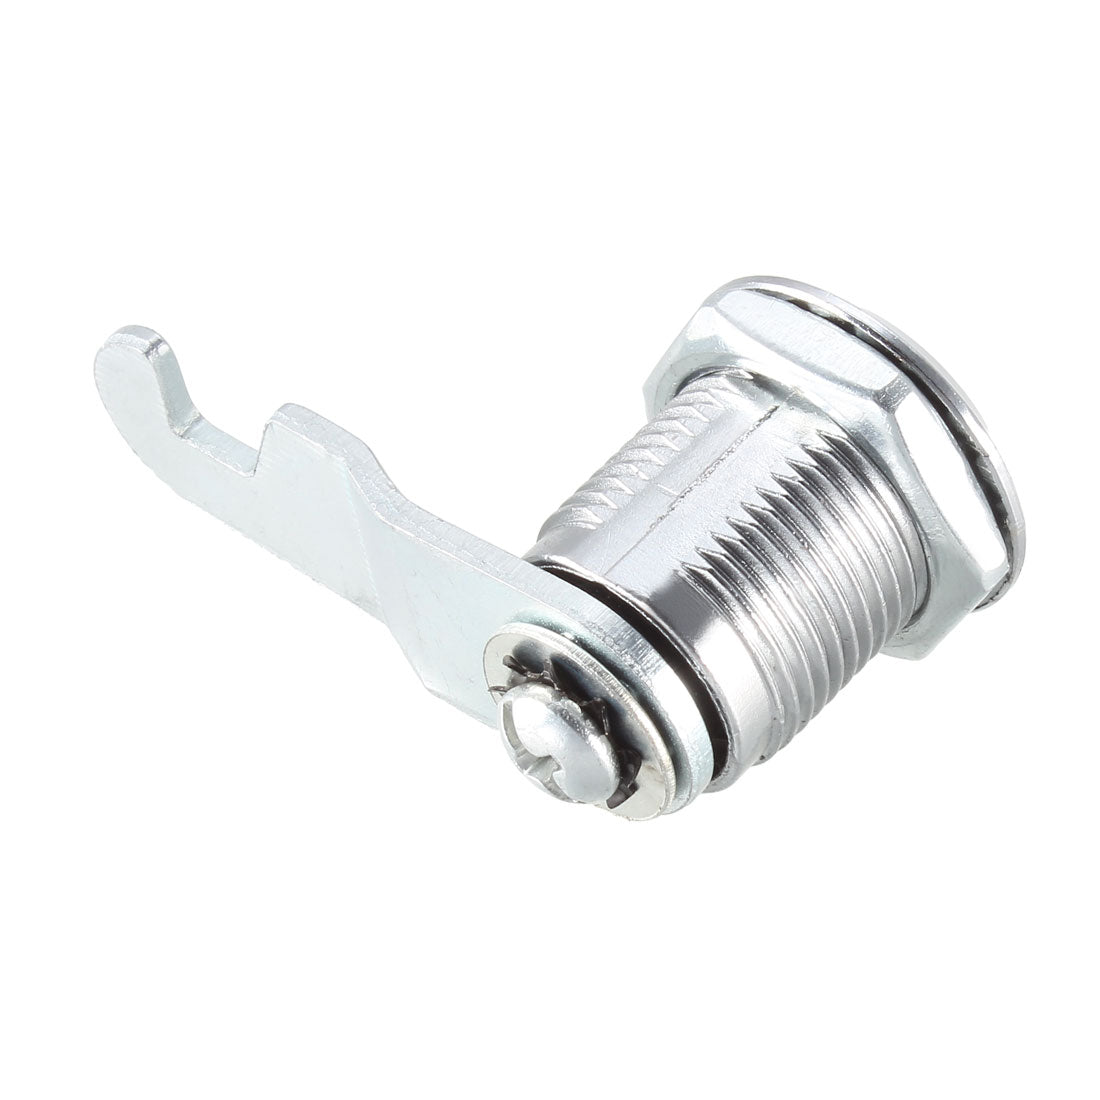 uxcell Uxcell Cam Lock 20mm Cylinder Length for Max 1/2-inch Panel Keyed Different 4Pcs